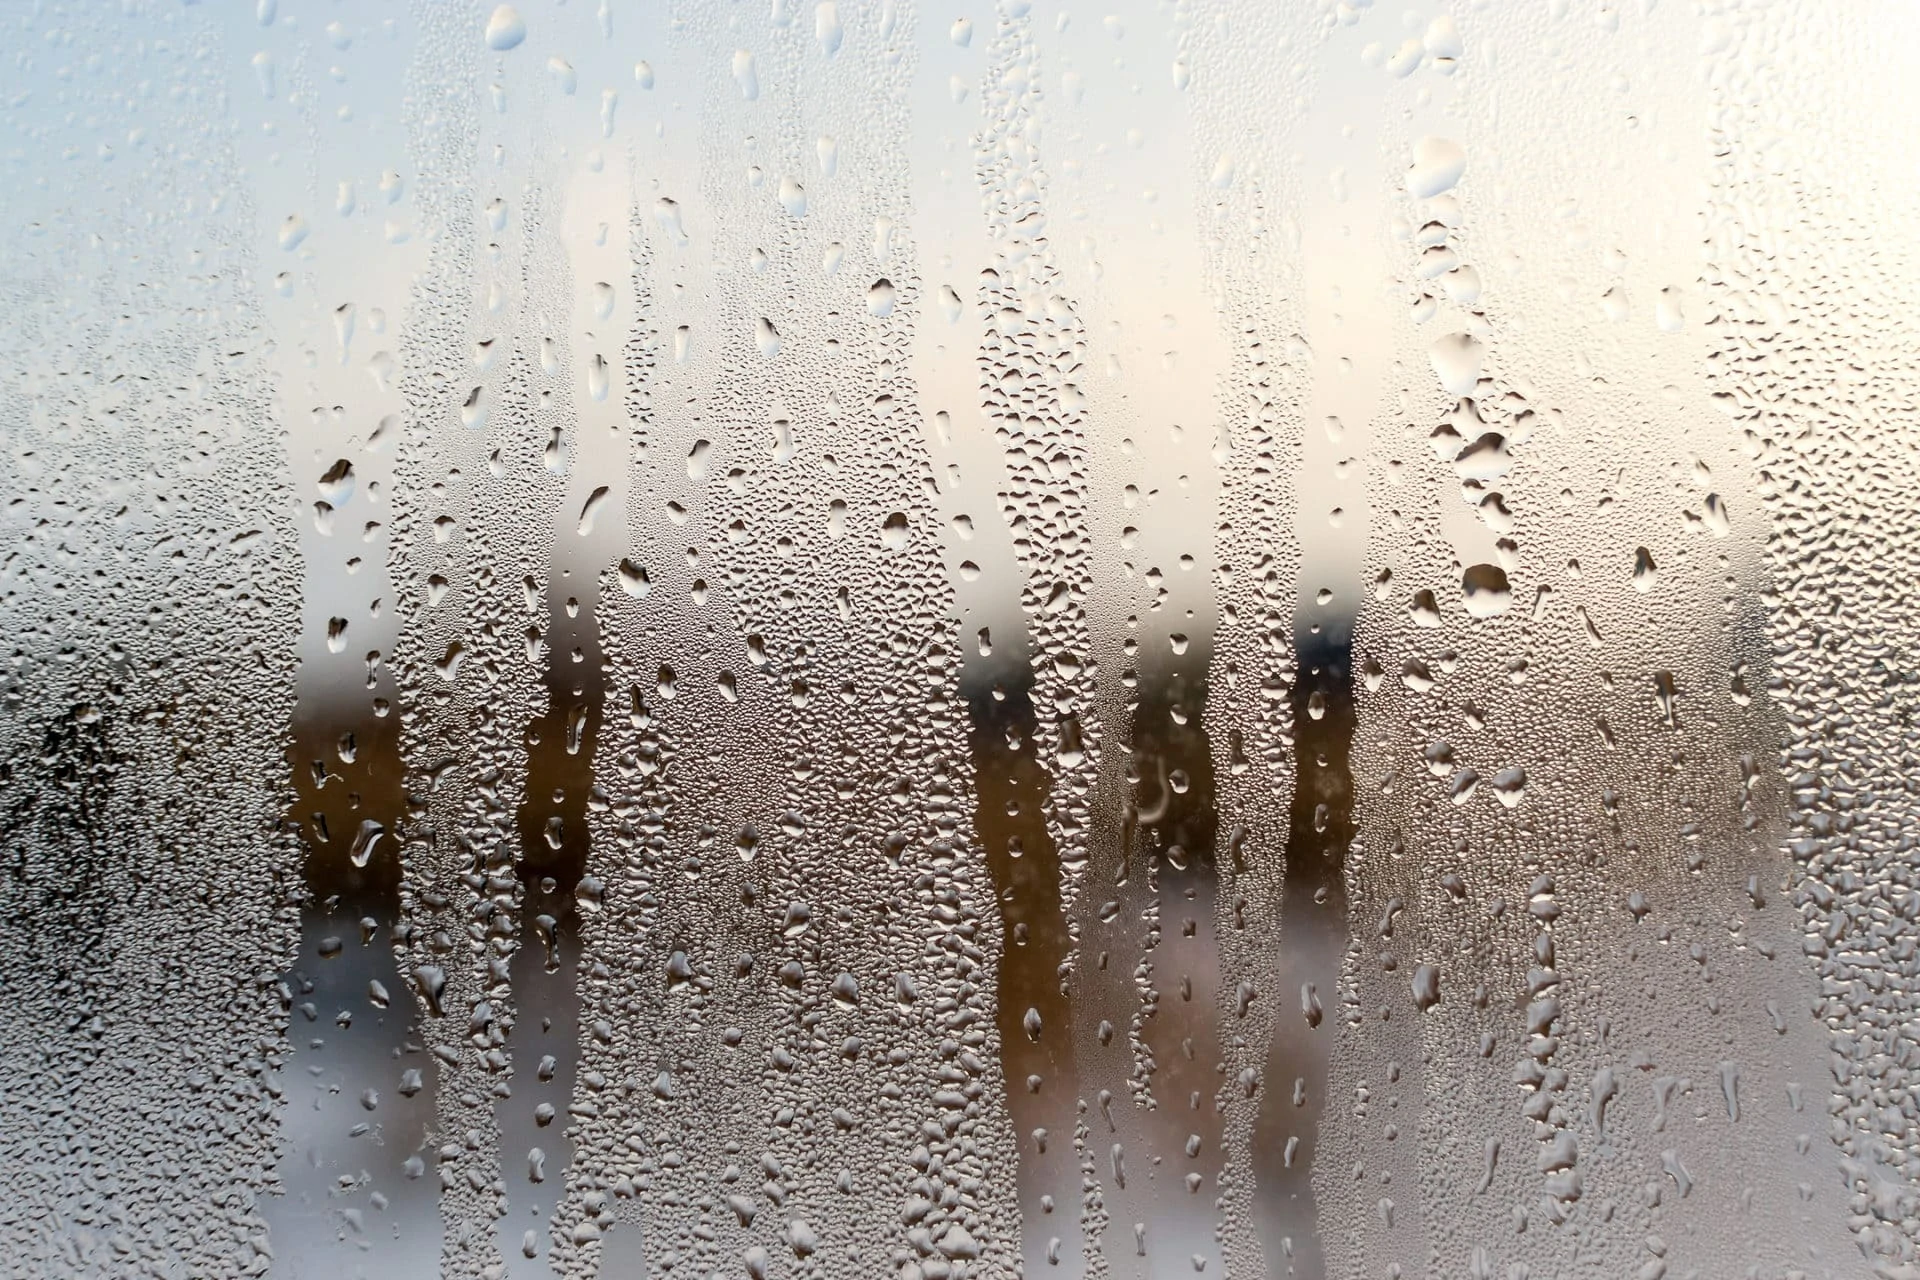 Condensation forms water droplets on the surface of a clear glass house interior window. Defocused background texture provides a brown colour. Copy space area for architecture domestic concepts and backdrops.